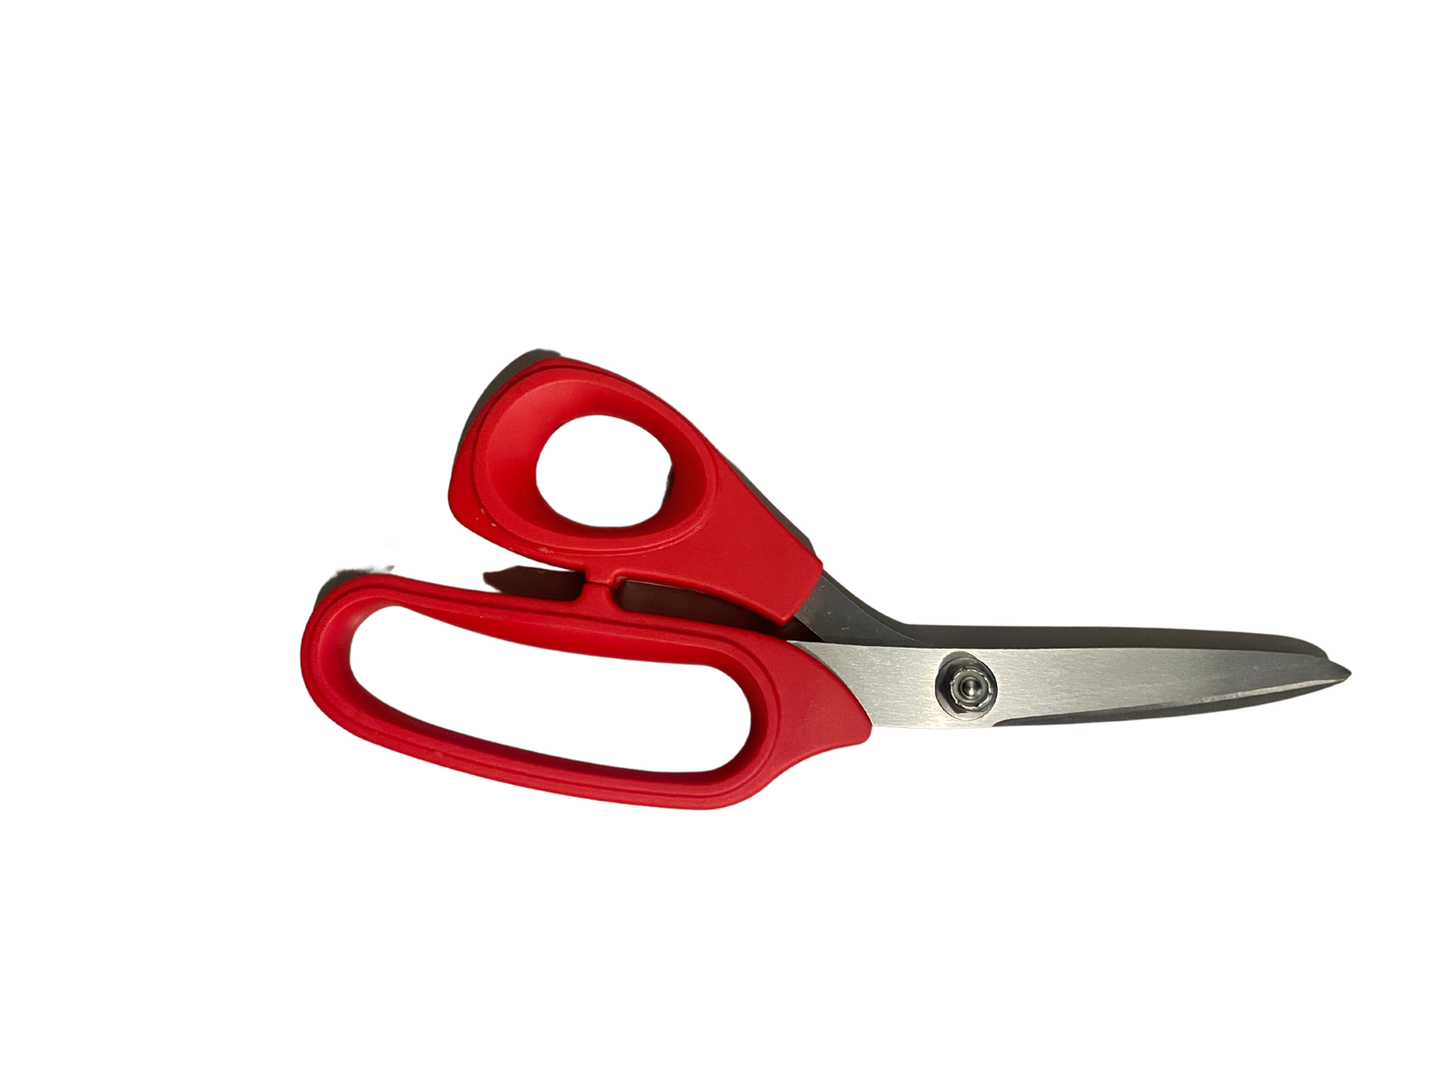 Bent Trimmer/Scissor for Leather (Right Handed)